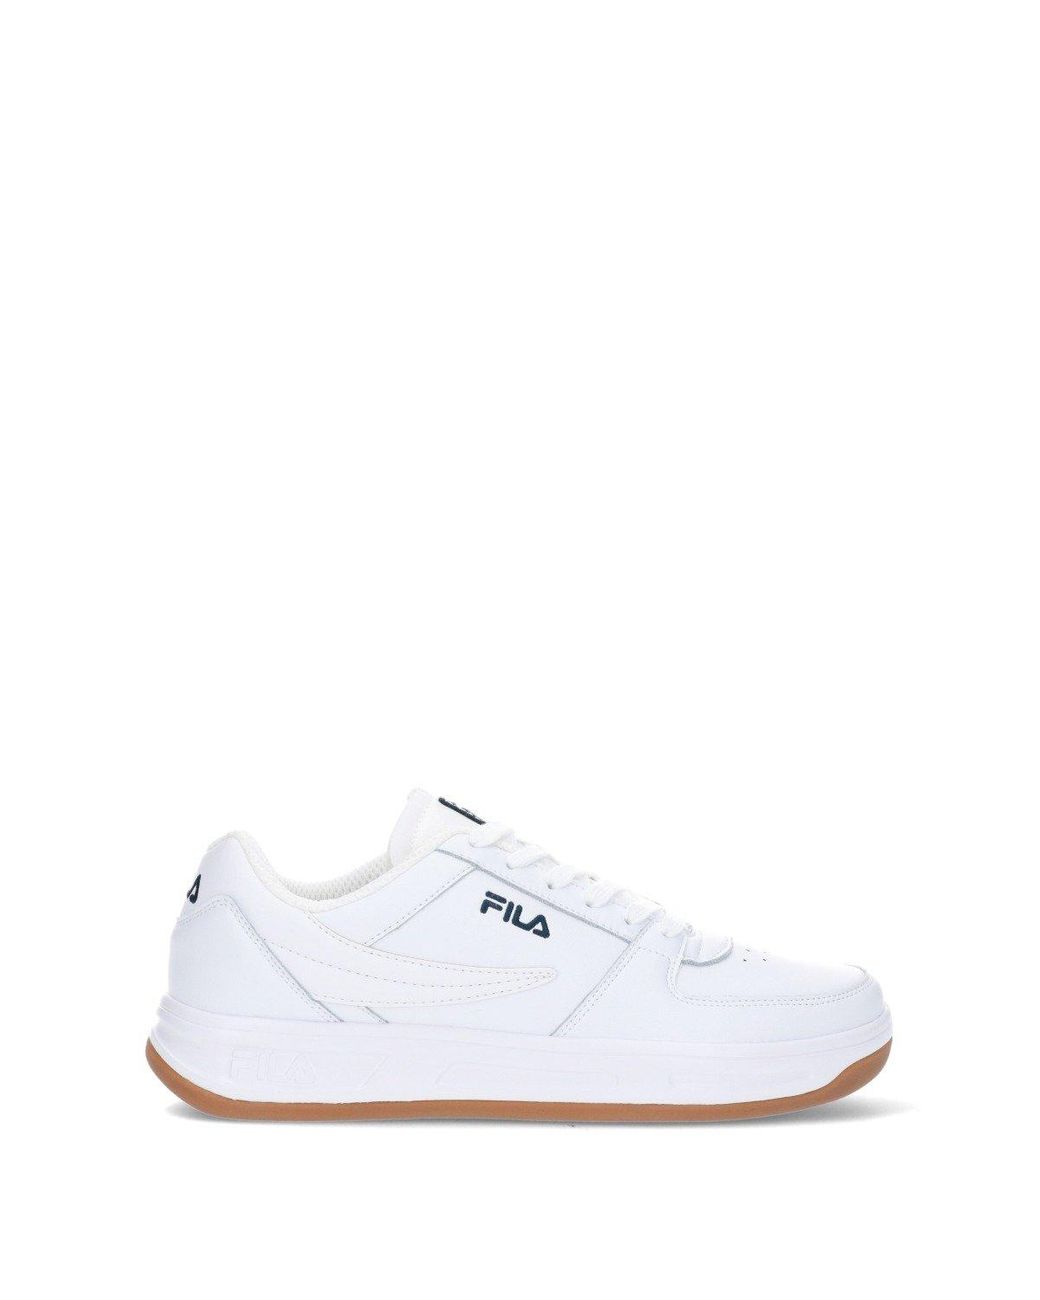 Fila Synthetic Low Top Sneakers in White for Men - Lyst